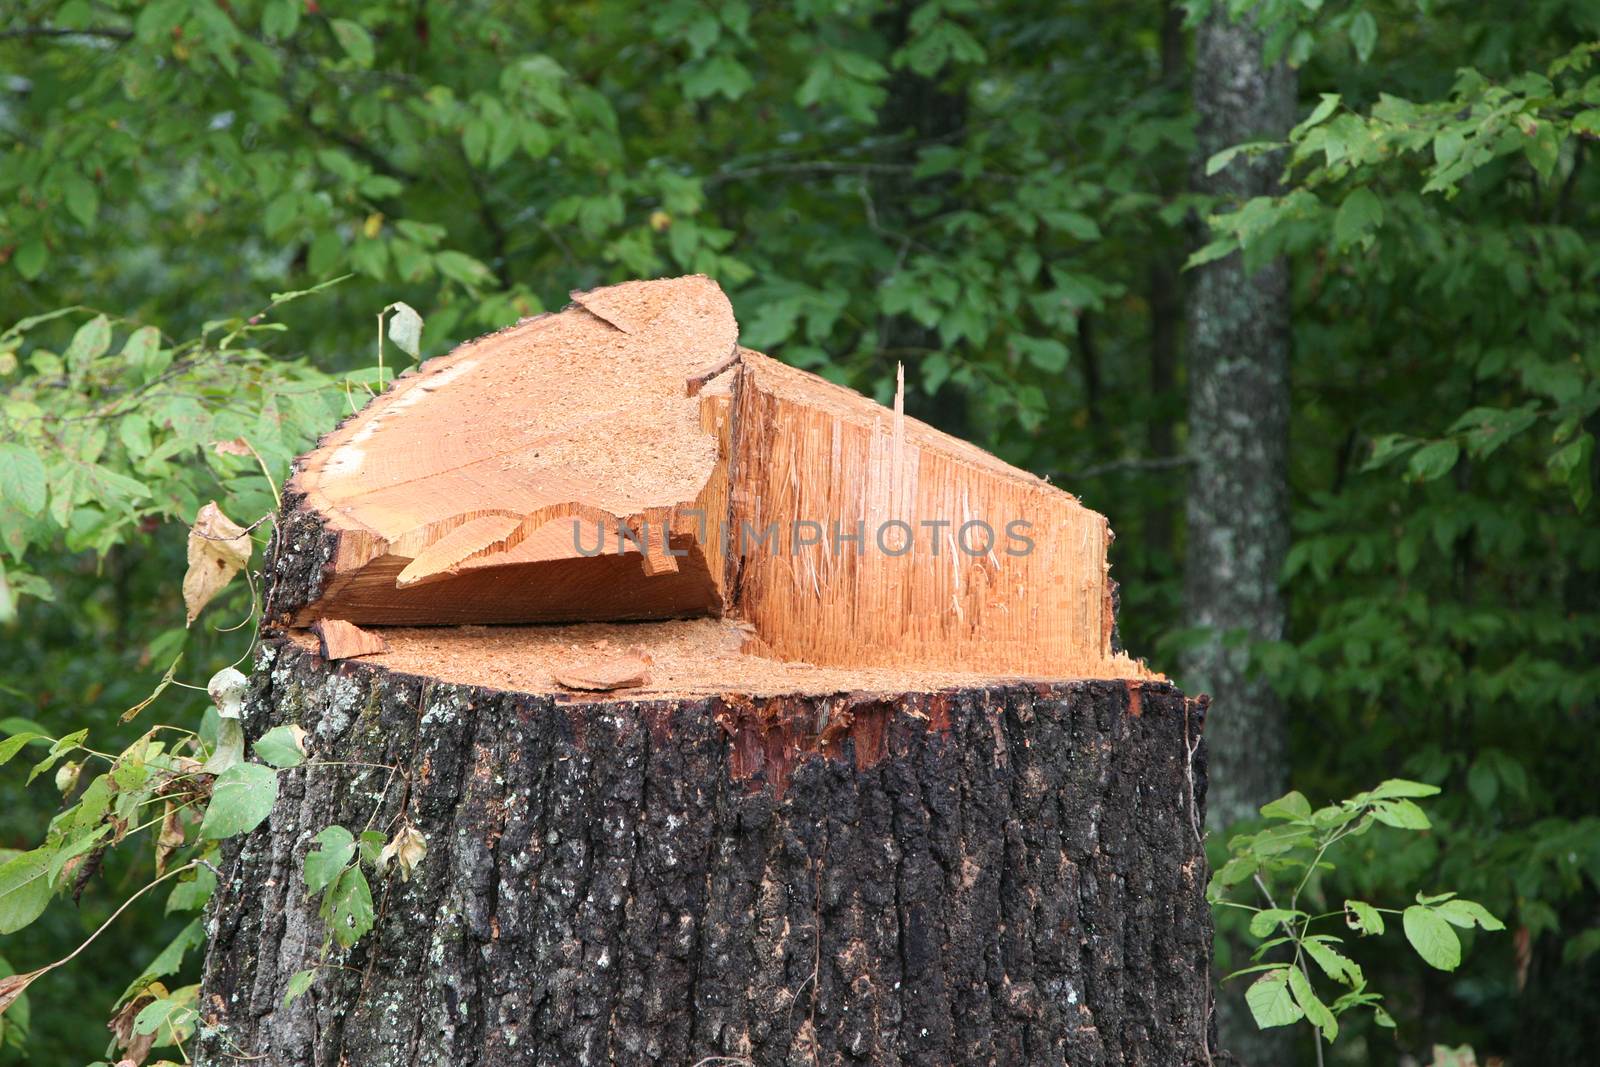 Image is of a nearly 100 year old oak tree chopped down in a forest.